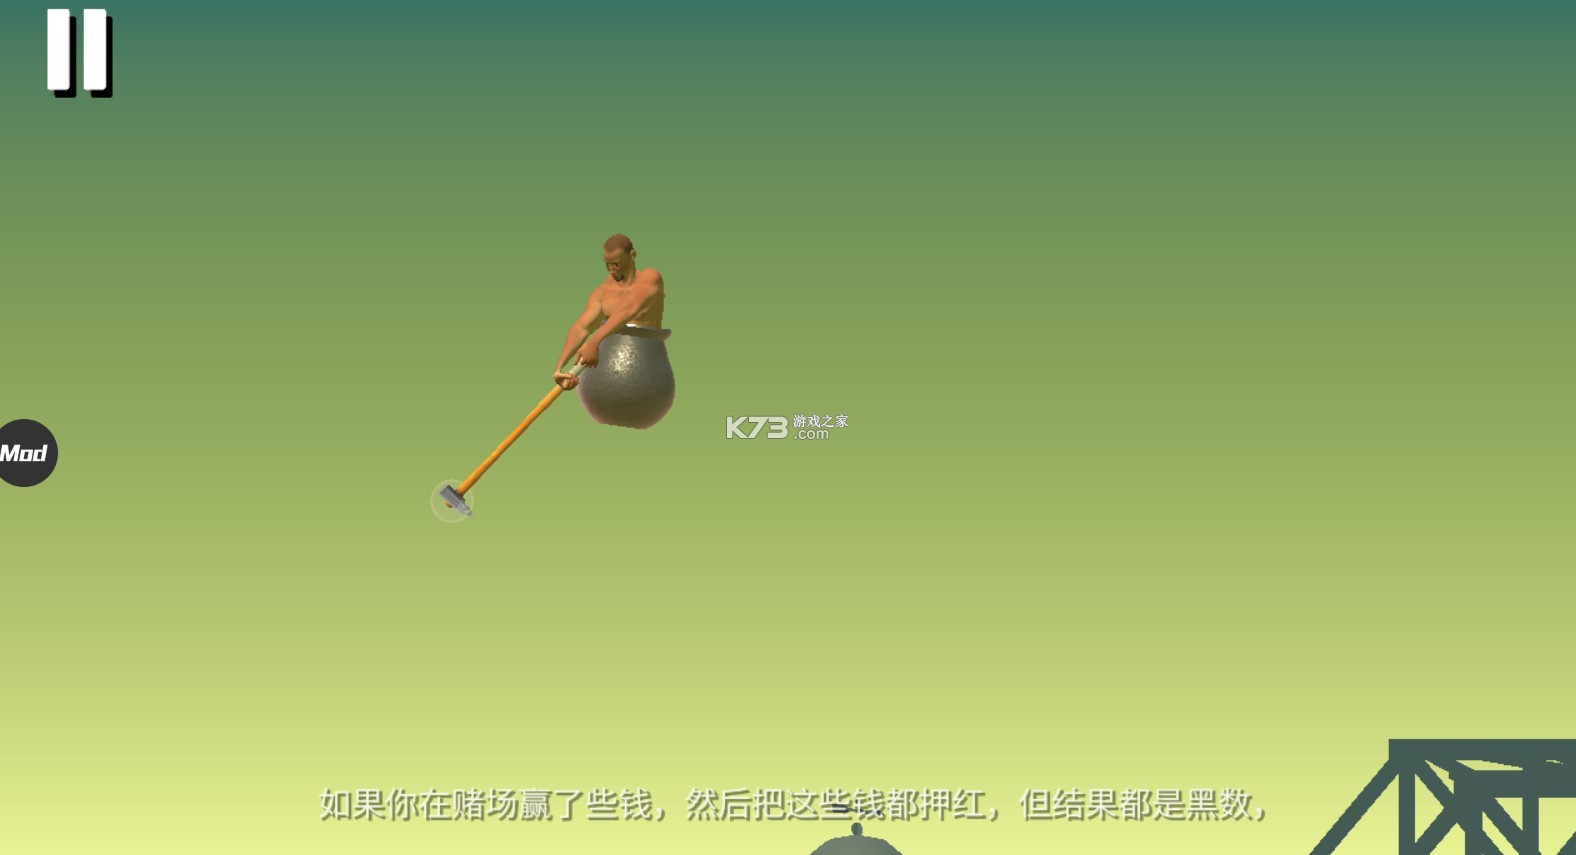 getting over itİ޹-getting over itϷ޹v1.9.4׿޹